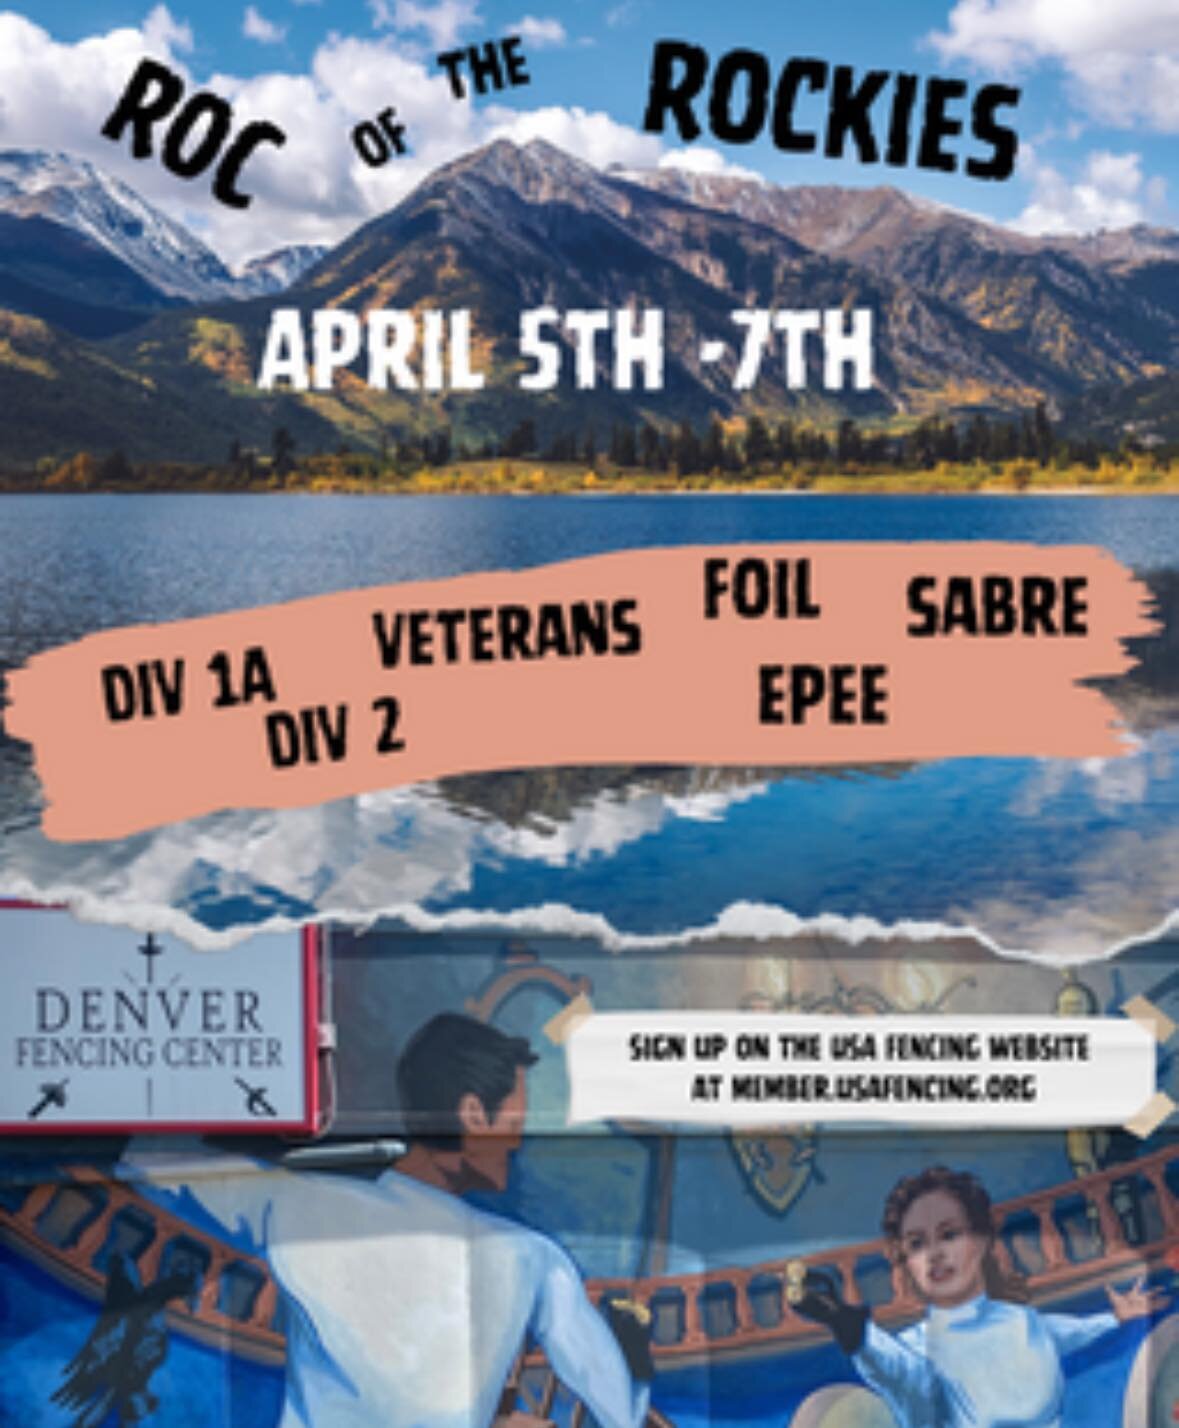 18 Grand Prizes inspired by &ldquo;Demonslayer&rdquo;. 18 unique events! 
Have you signed up for ROC of the Rockies?

https://member.usafencing.org/details/tournaments/7612

#denverfencing #denverfencingcenter #denvercolorado #usafencing #denver #fen